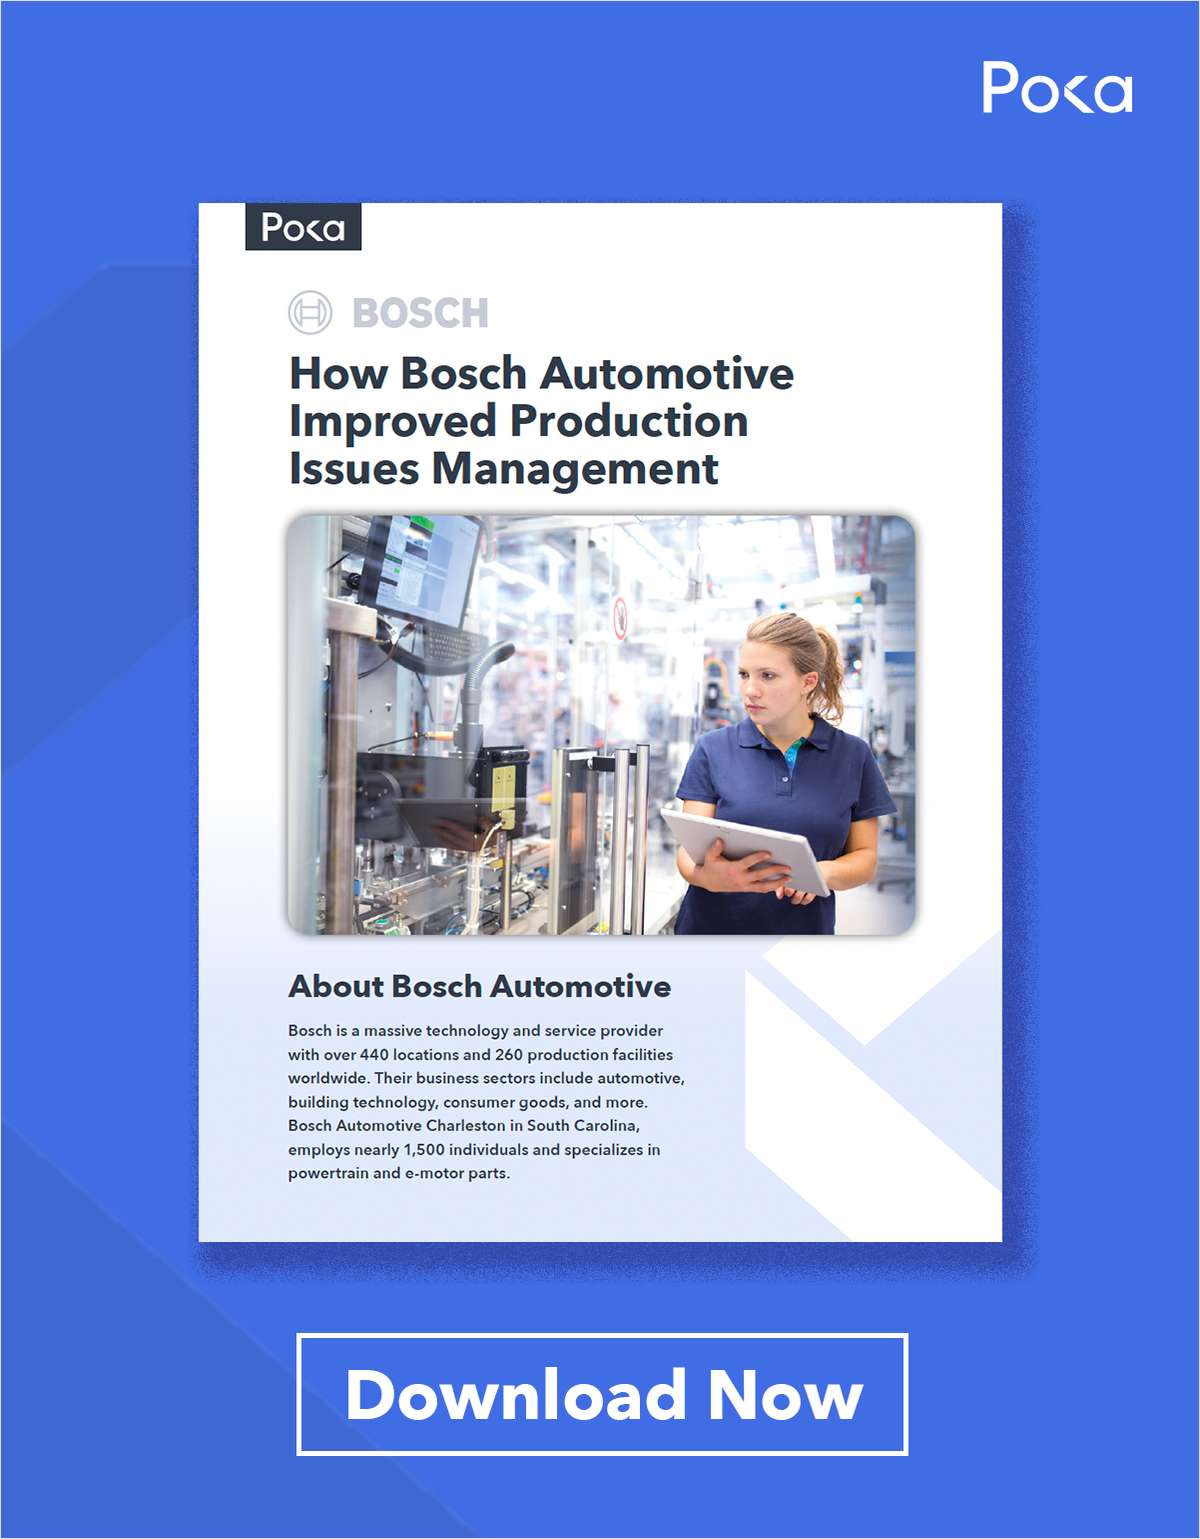 How Bosch Automotive Improved Production Issues Management with Poka